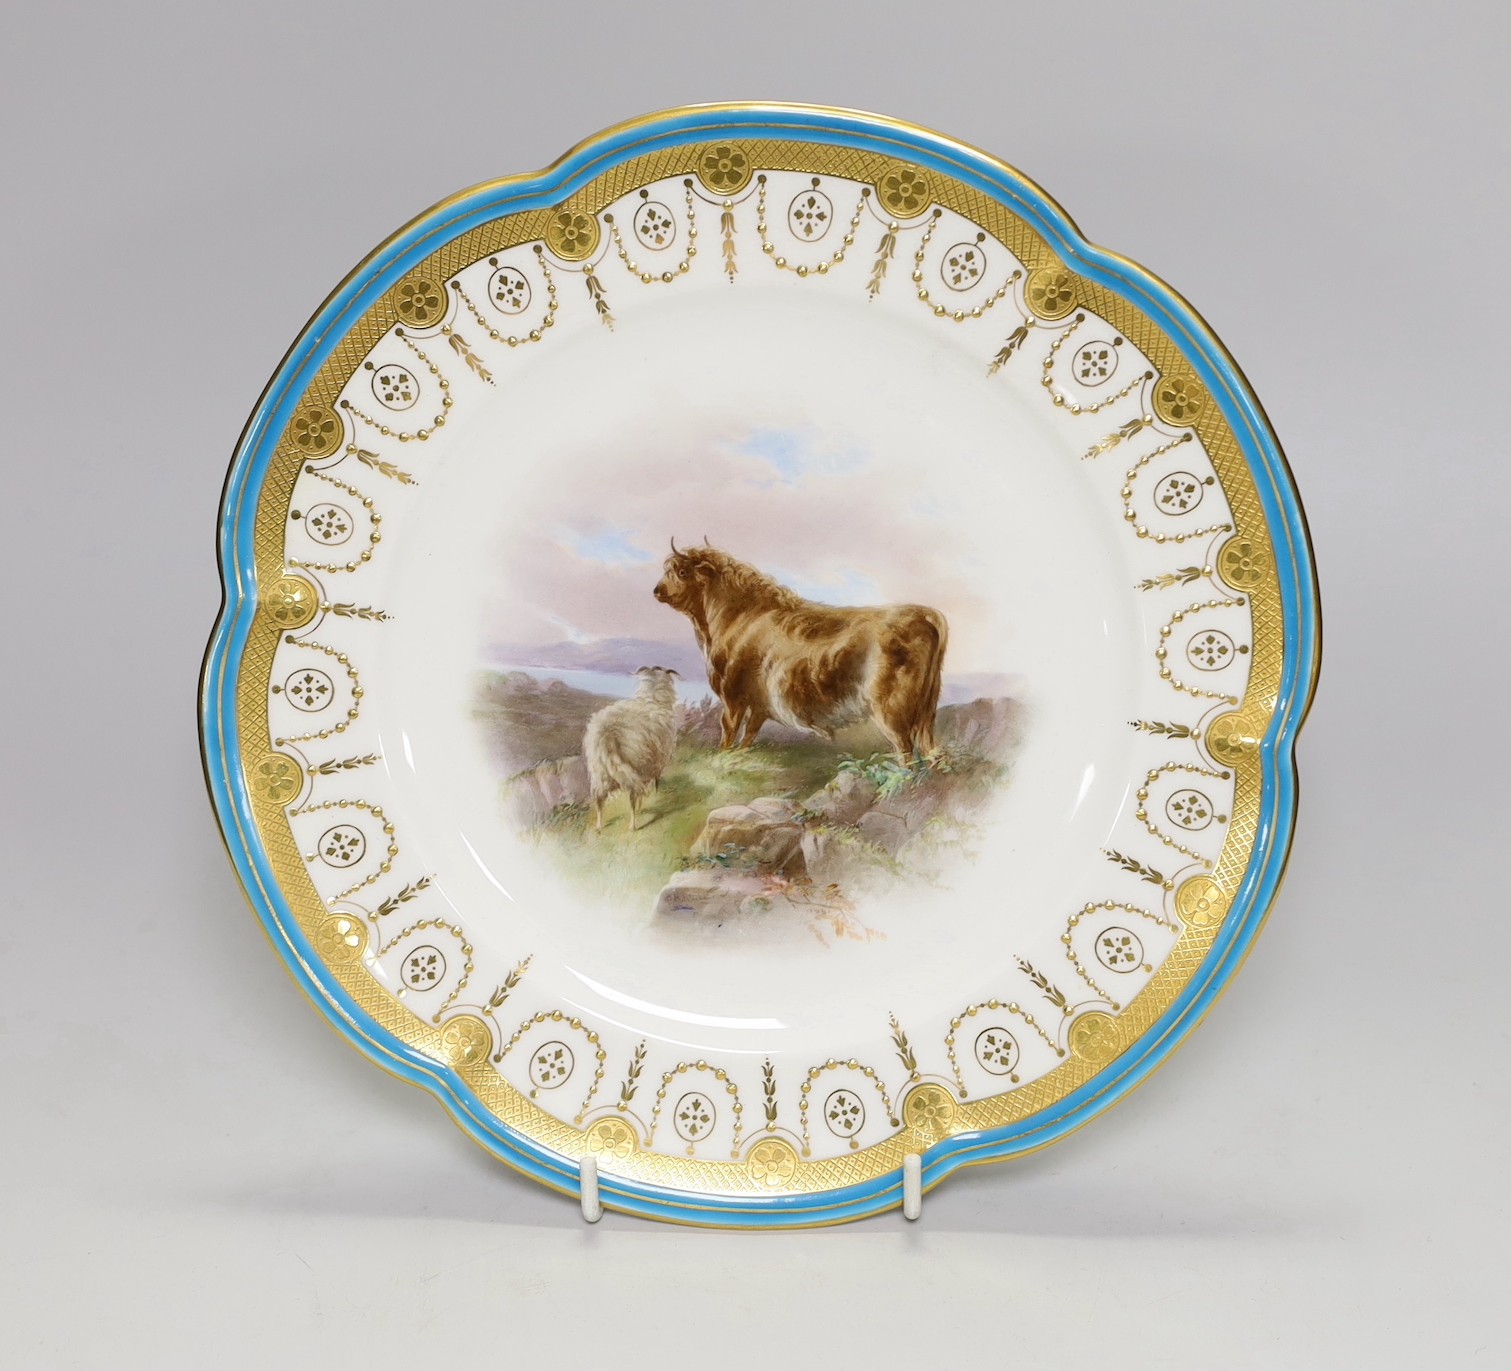 A Minton plate with turquoise, acid etched and raised gilt border painted with a bull and a sheep by Henry Mitchell, signed Henry Mitchell on the rock in the foreground, 24cm